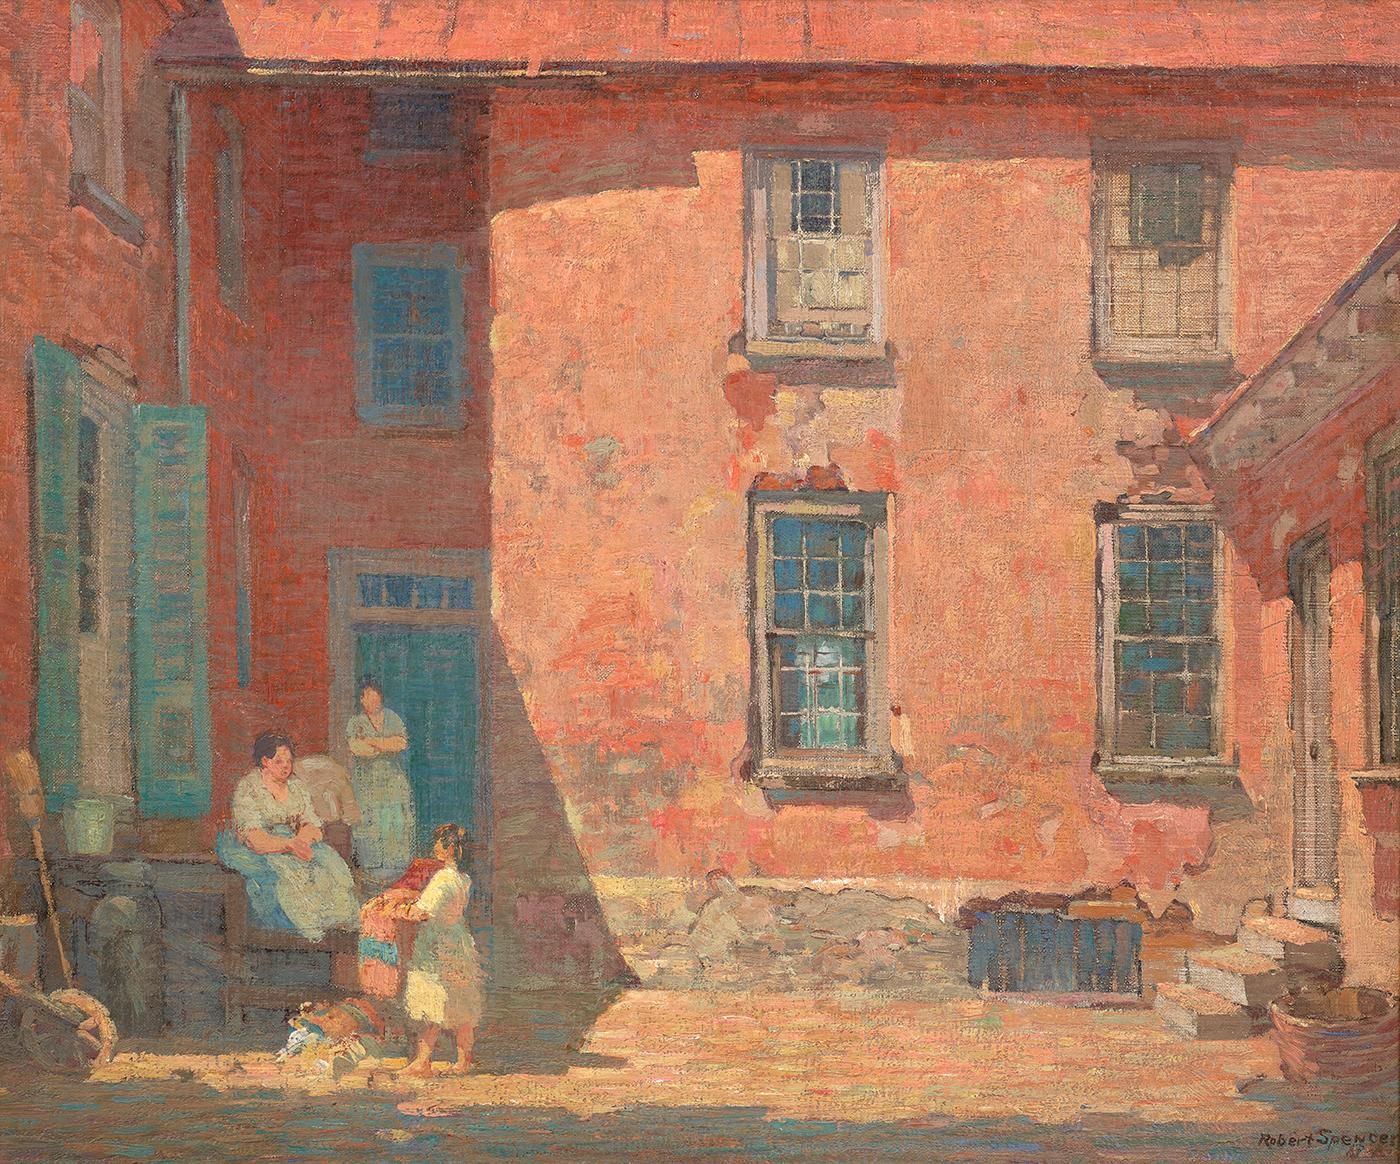 Robert Spencer Figurative Painting - Courtyard at Noon